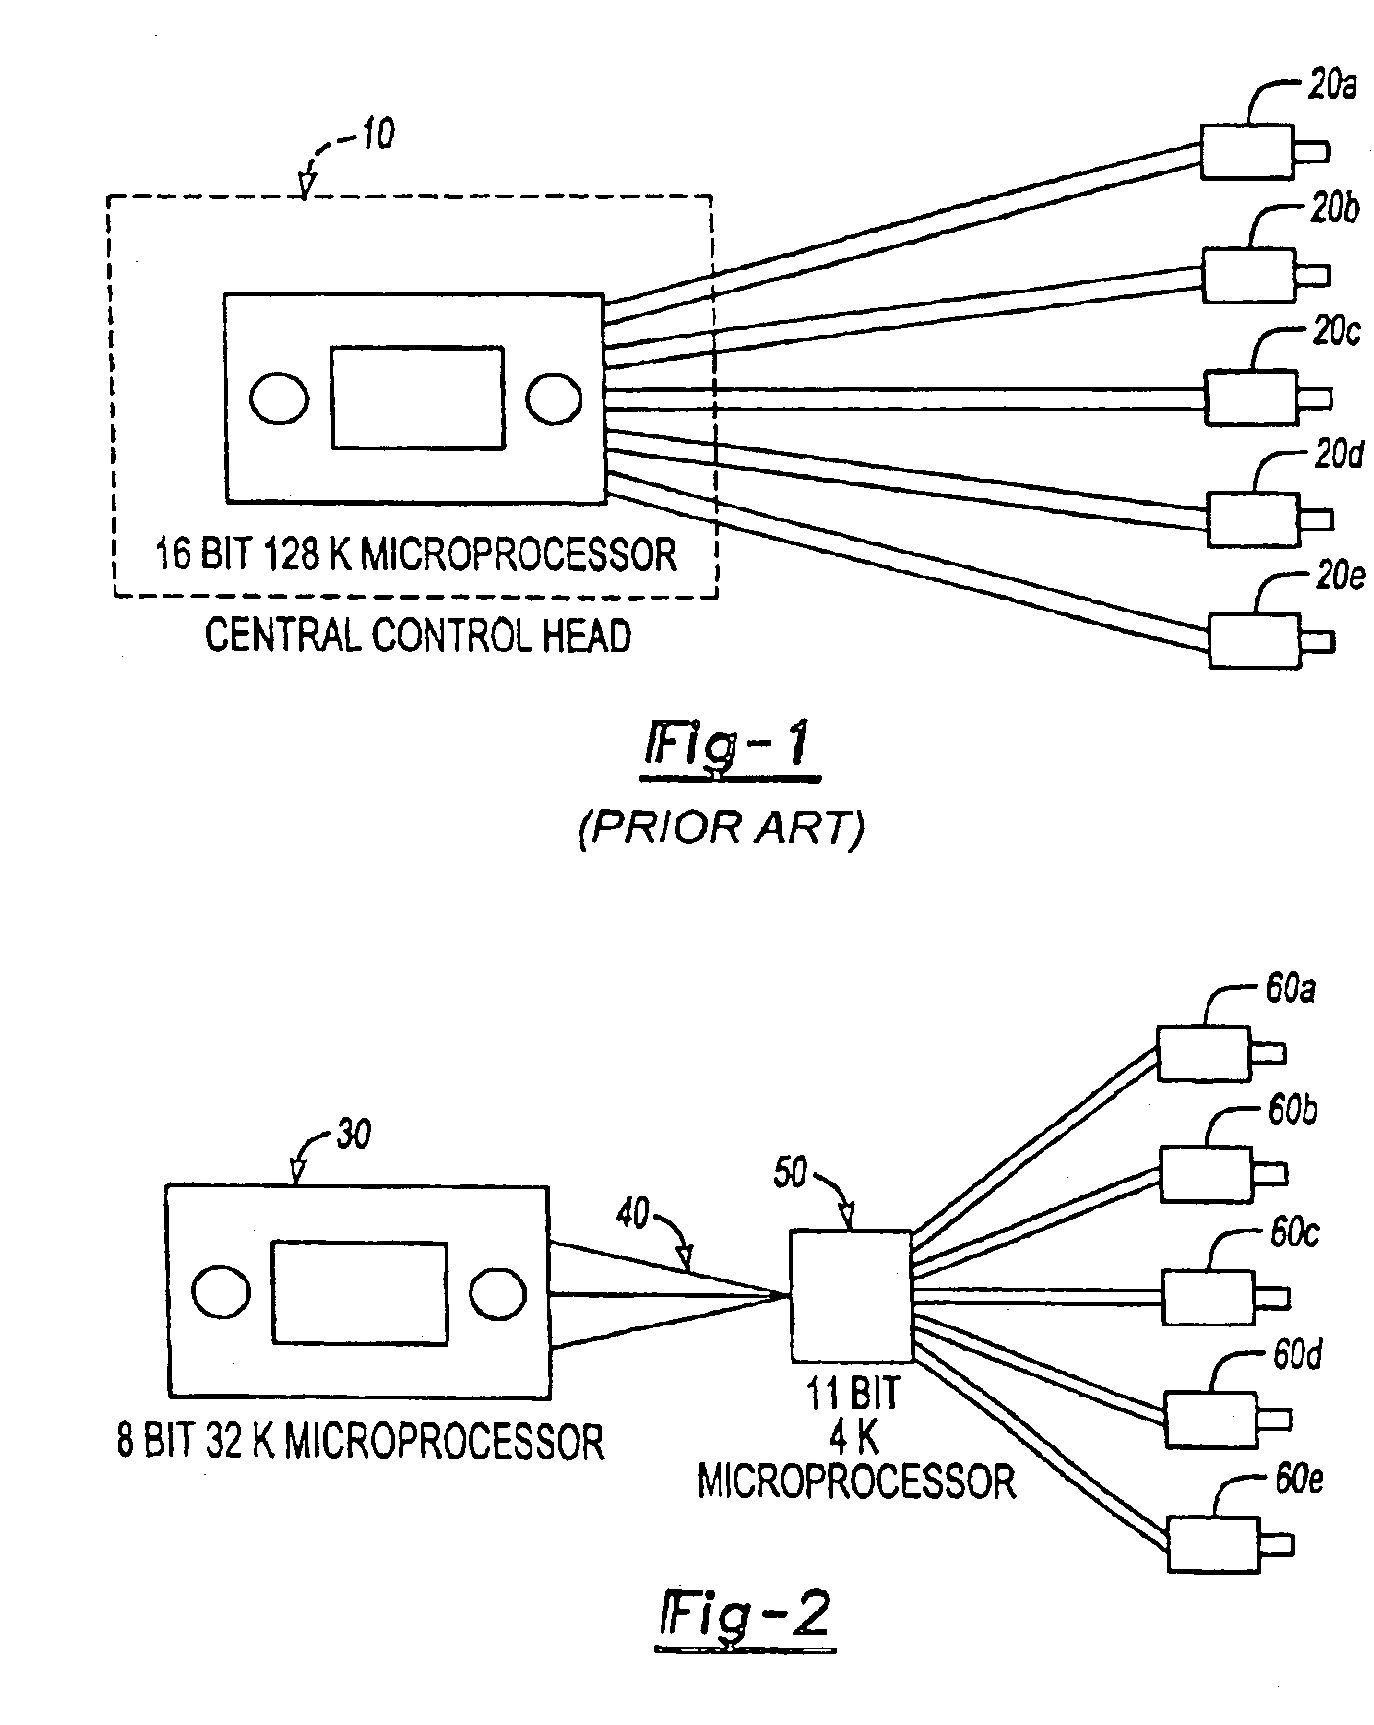 Pulse count motor control device